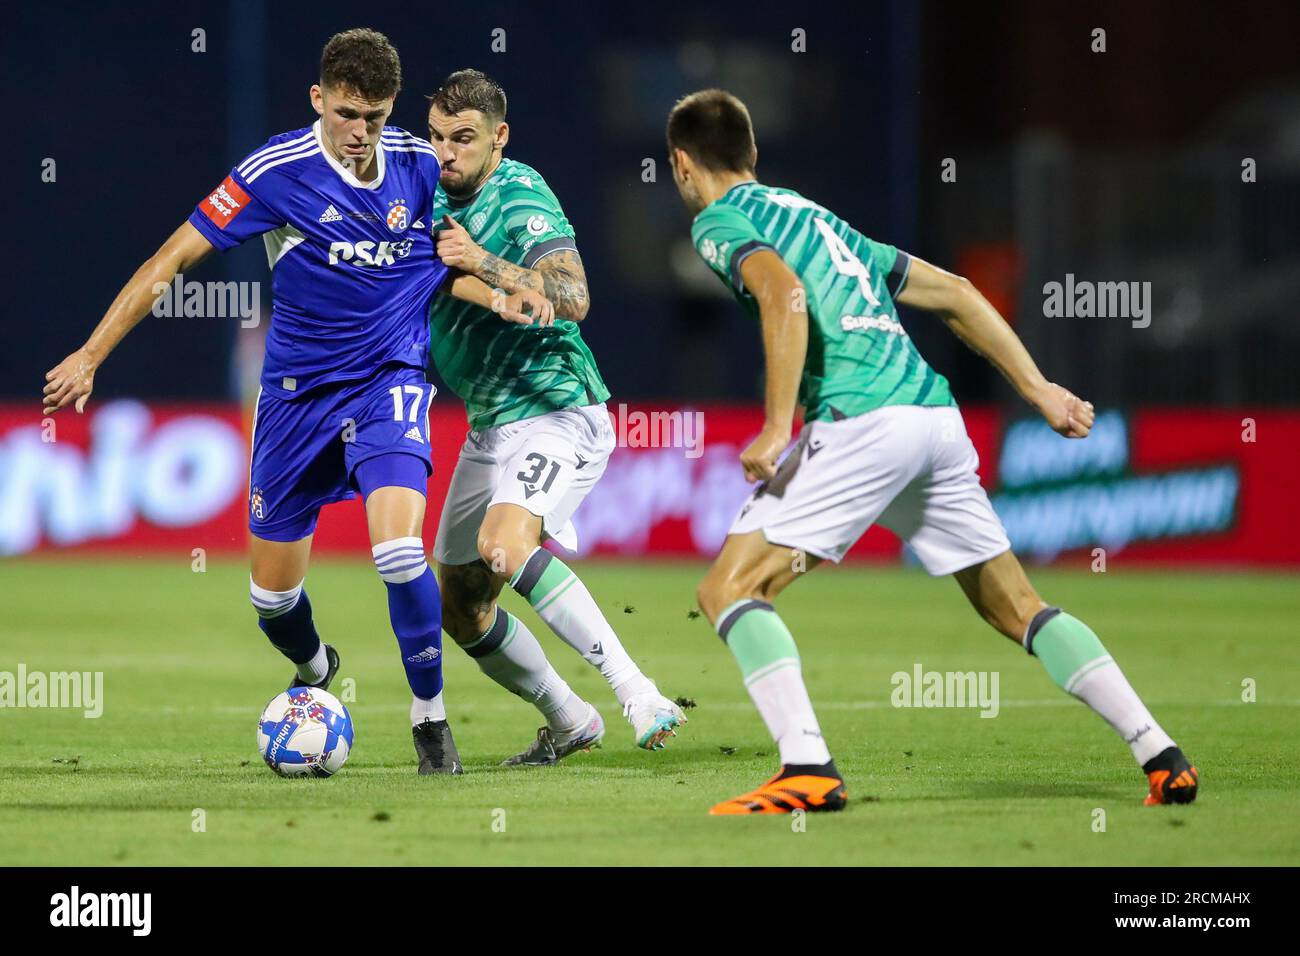 Zagreb, Croatia. 15th July, 2023. Fran Topic of Dinamo Zagreb and Zvonimir  Sarlija of Hajduk Split competes for the ball during the Supersport  Supercup match between GNK Dinamo Zagreb and HNK Hajduk